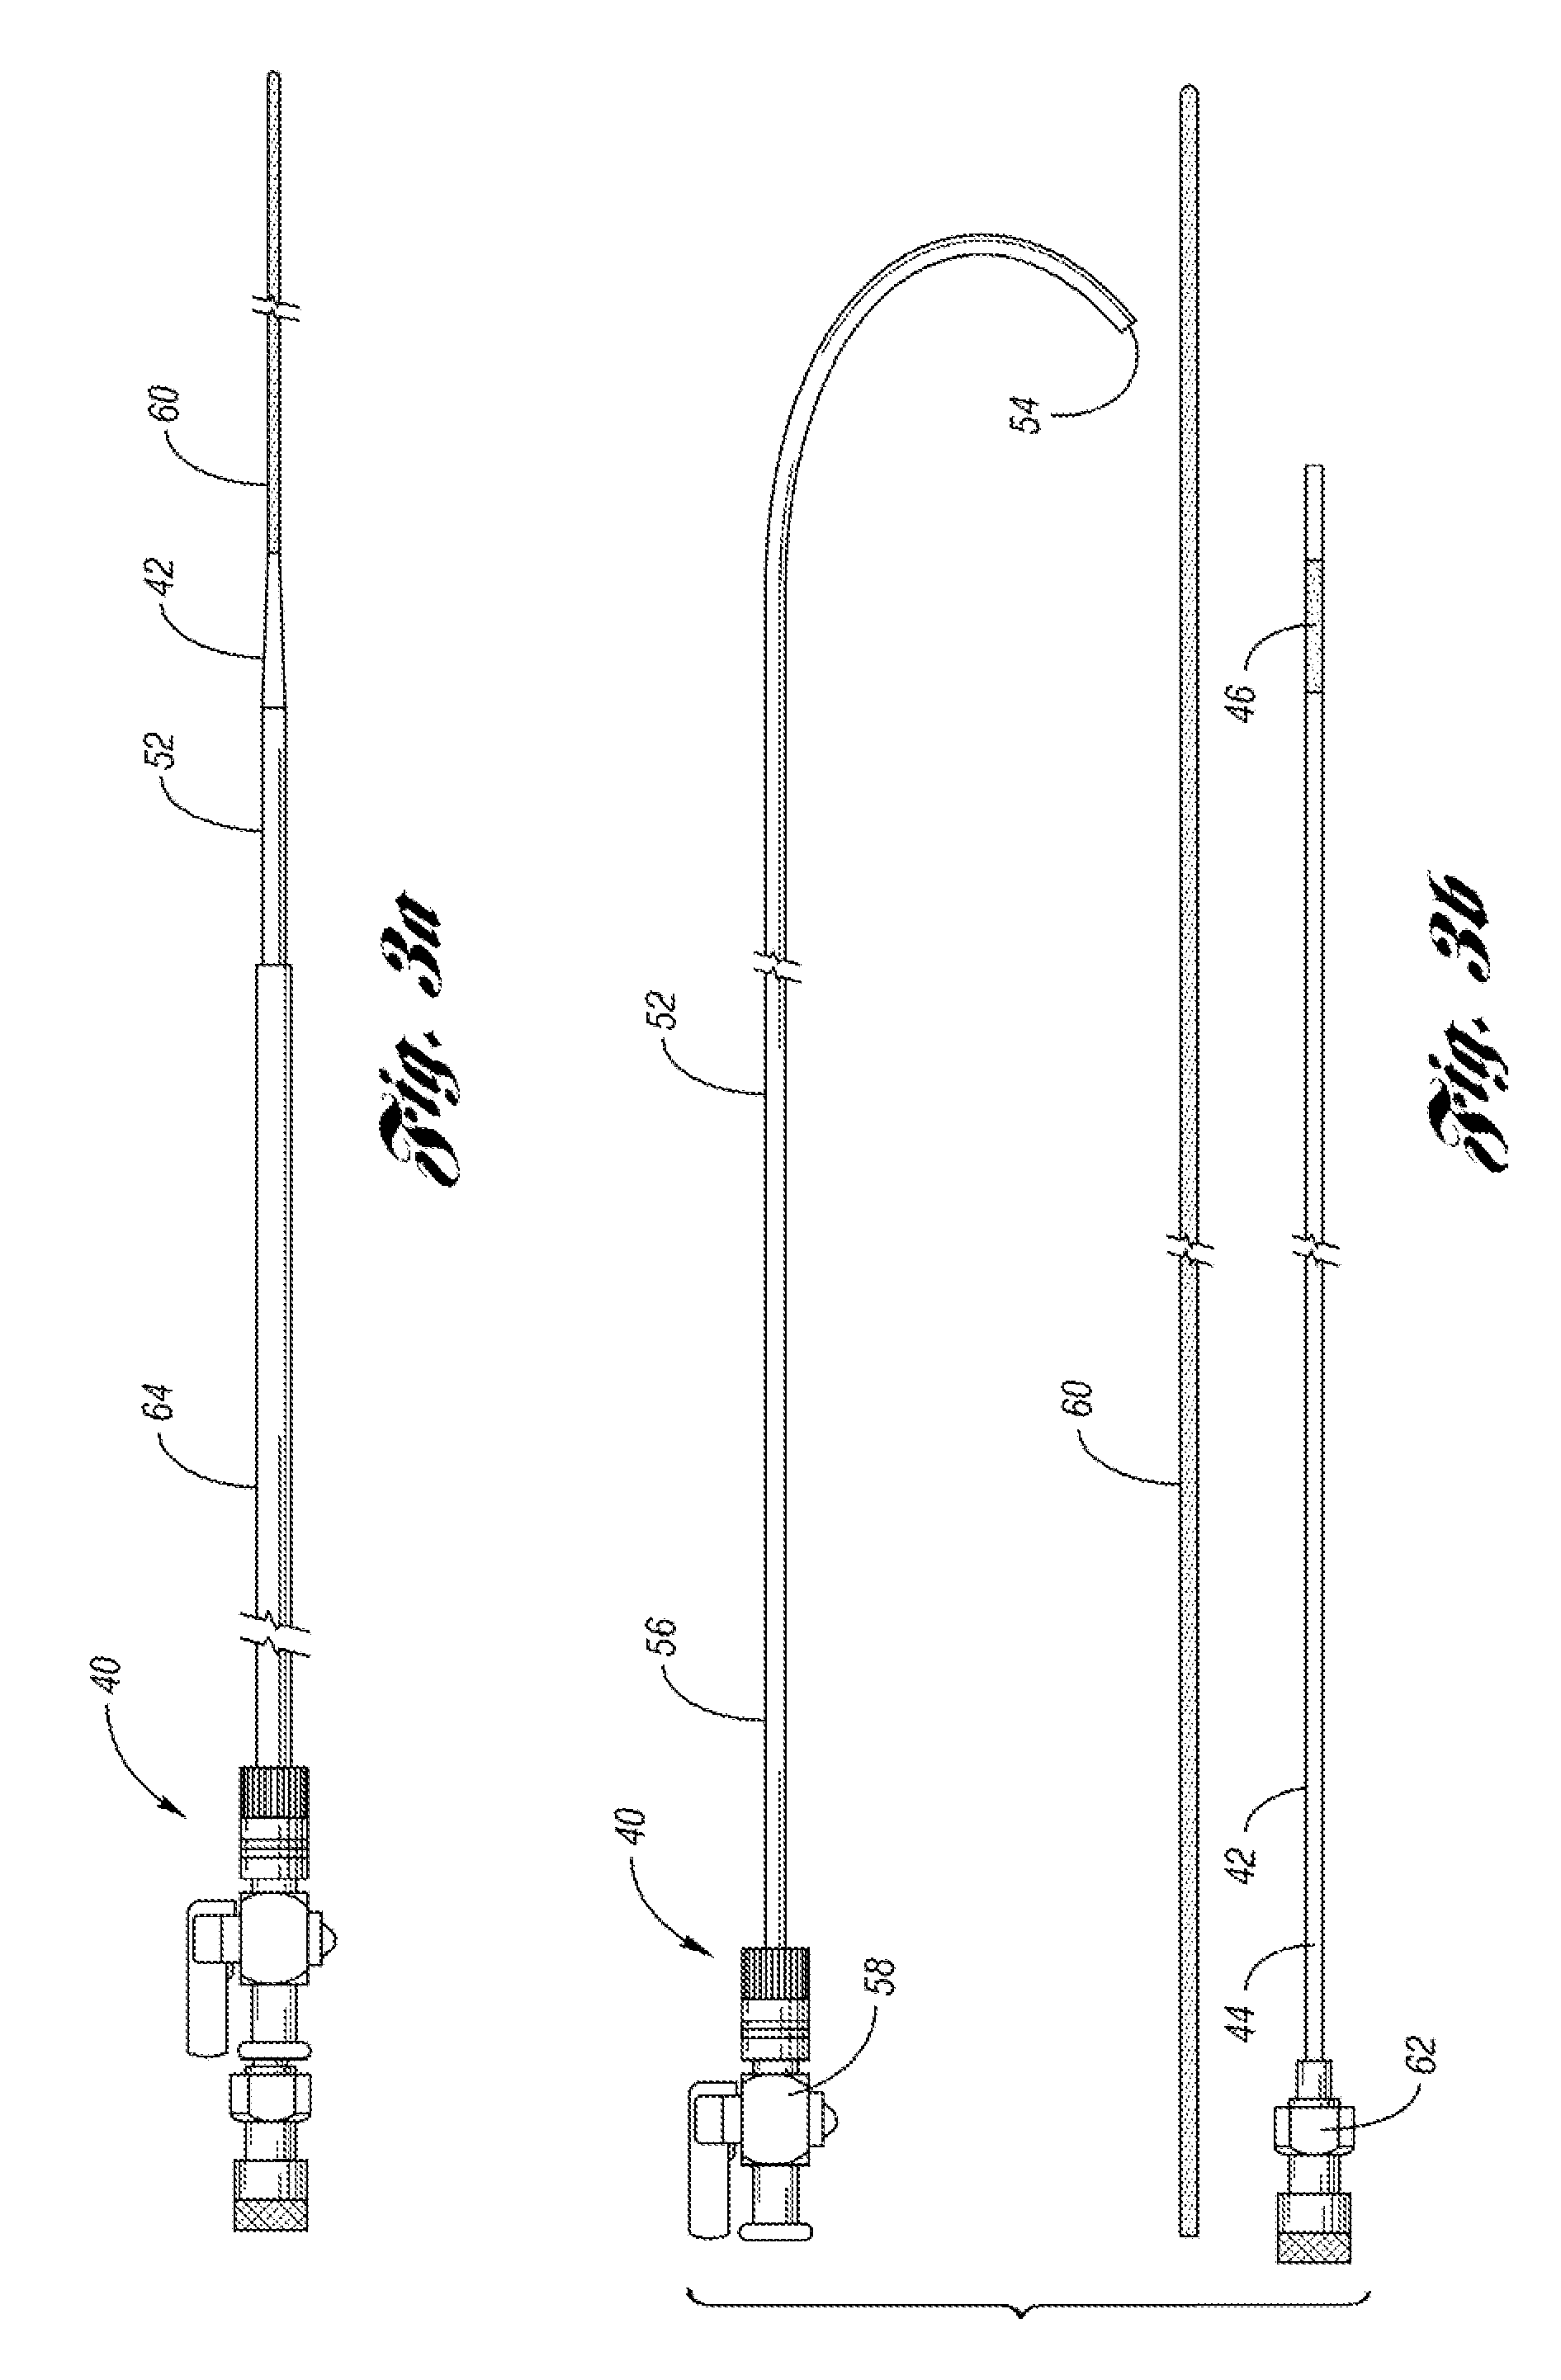 Expandable device for treatment of a stricture in a body vessel